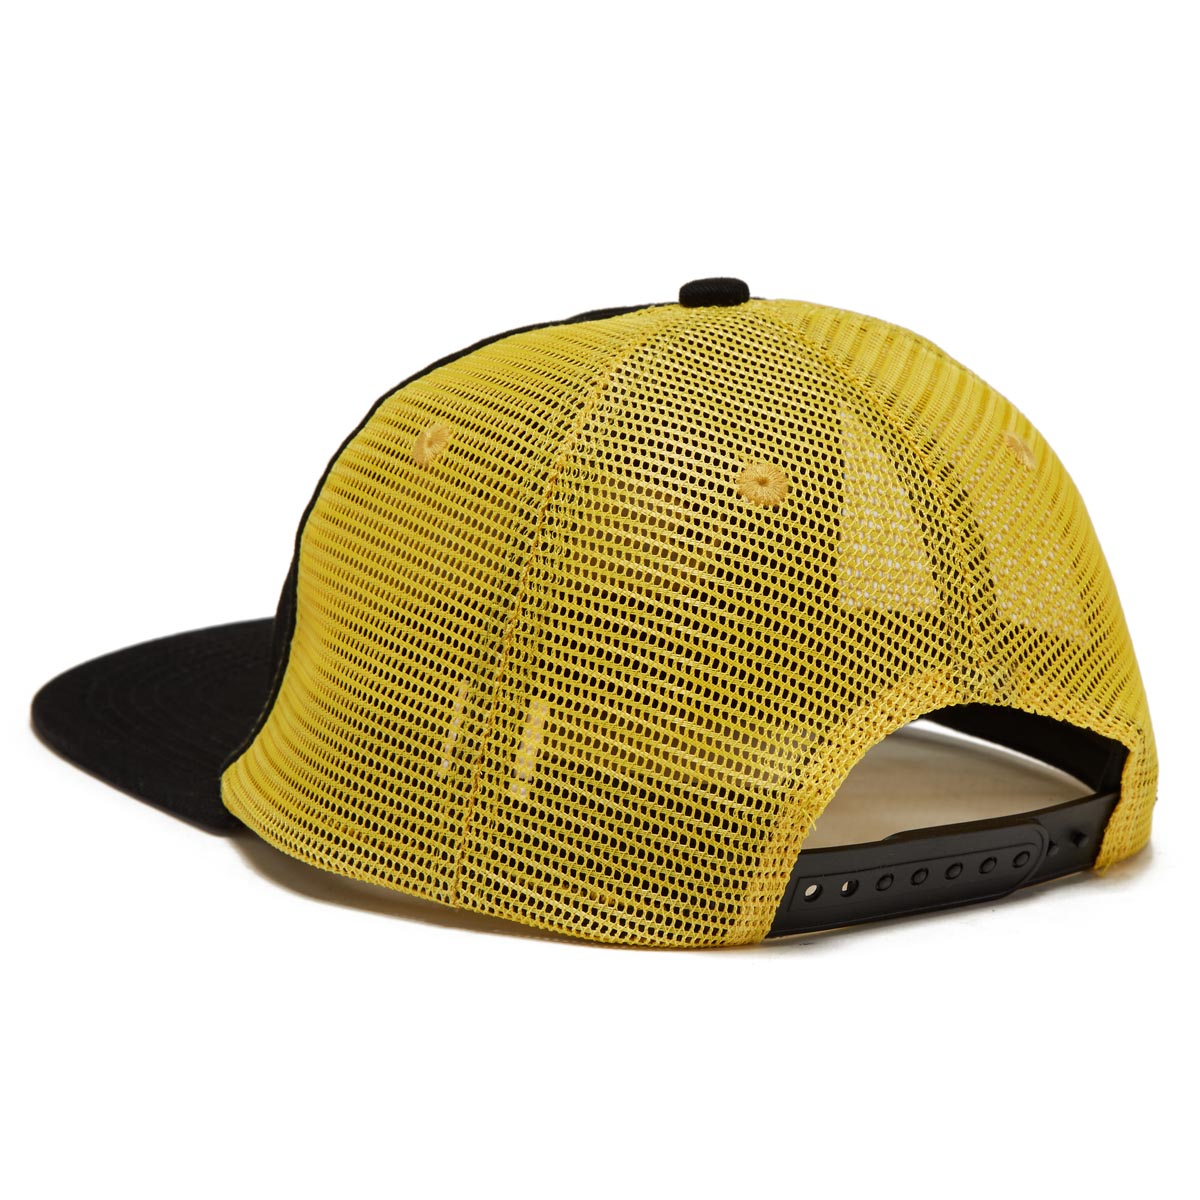 There Chainsaw Snapback Hat - Black/Yellow image 2